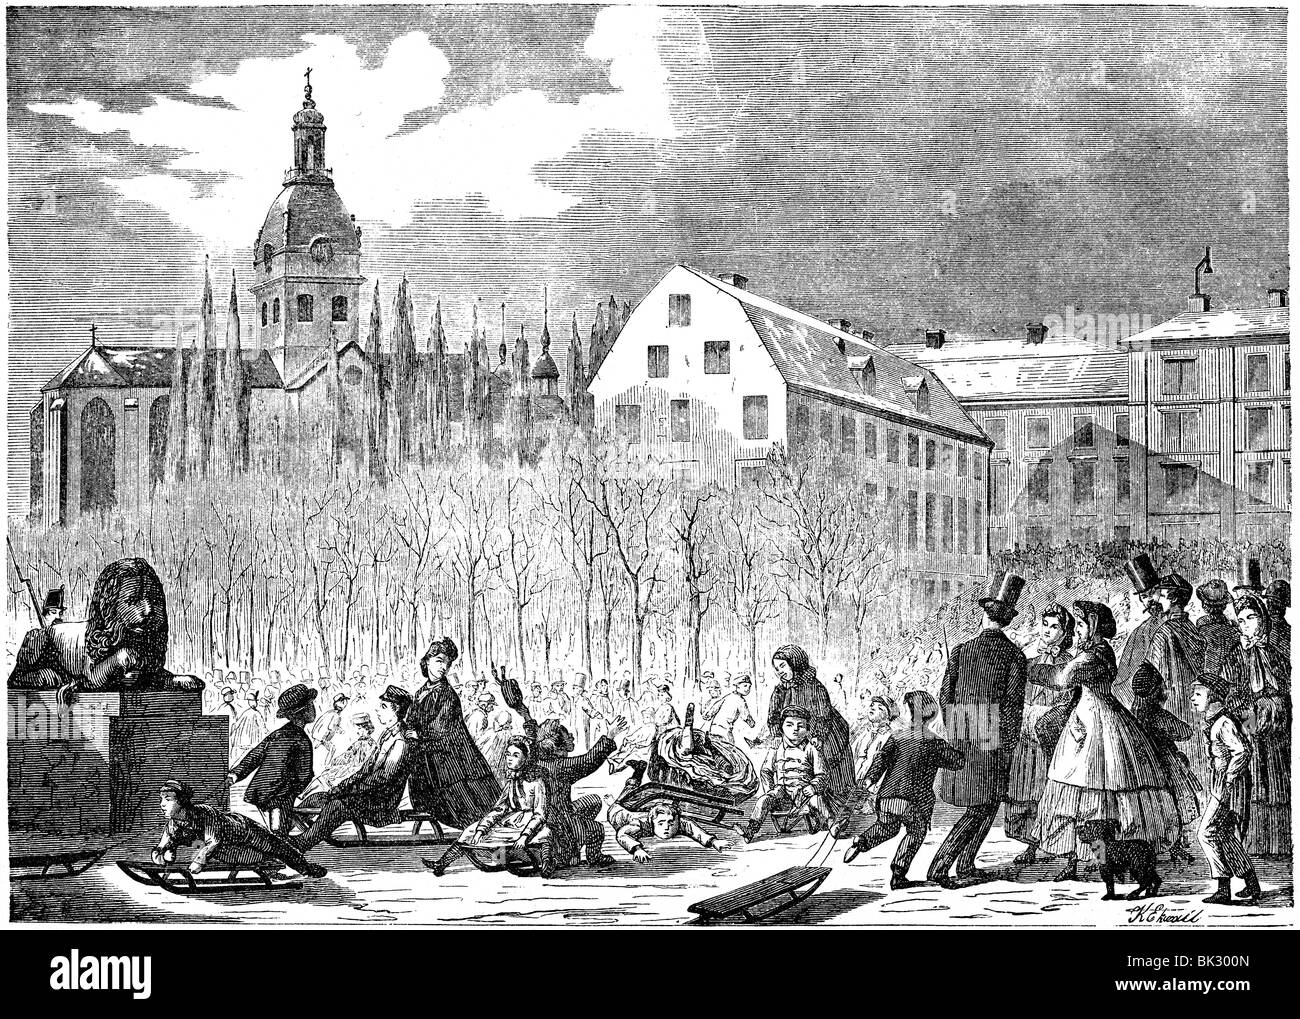 Winter scene at Square of Charles XIII, Stockholm, Sweden. Engraving by Knut Alfred Ekvall (1843-1912) Stock Photo